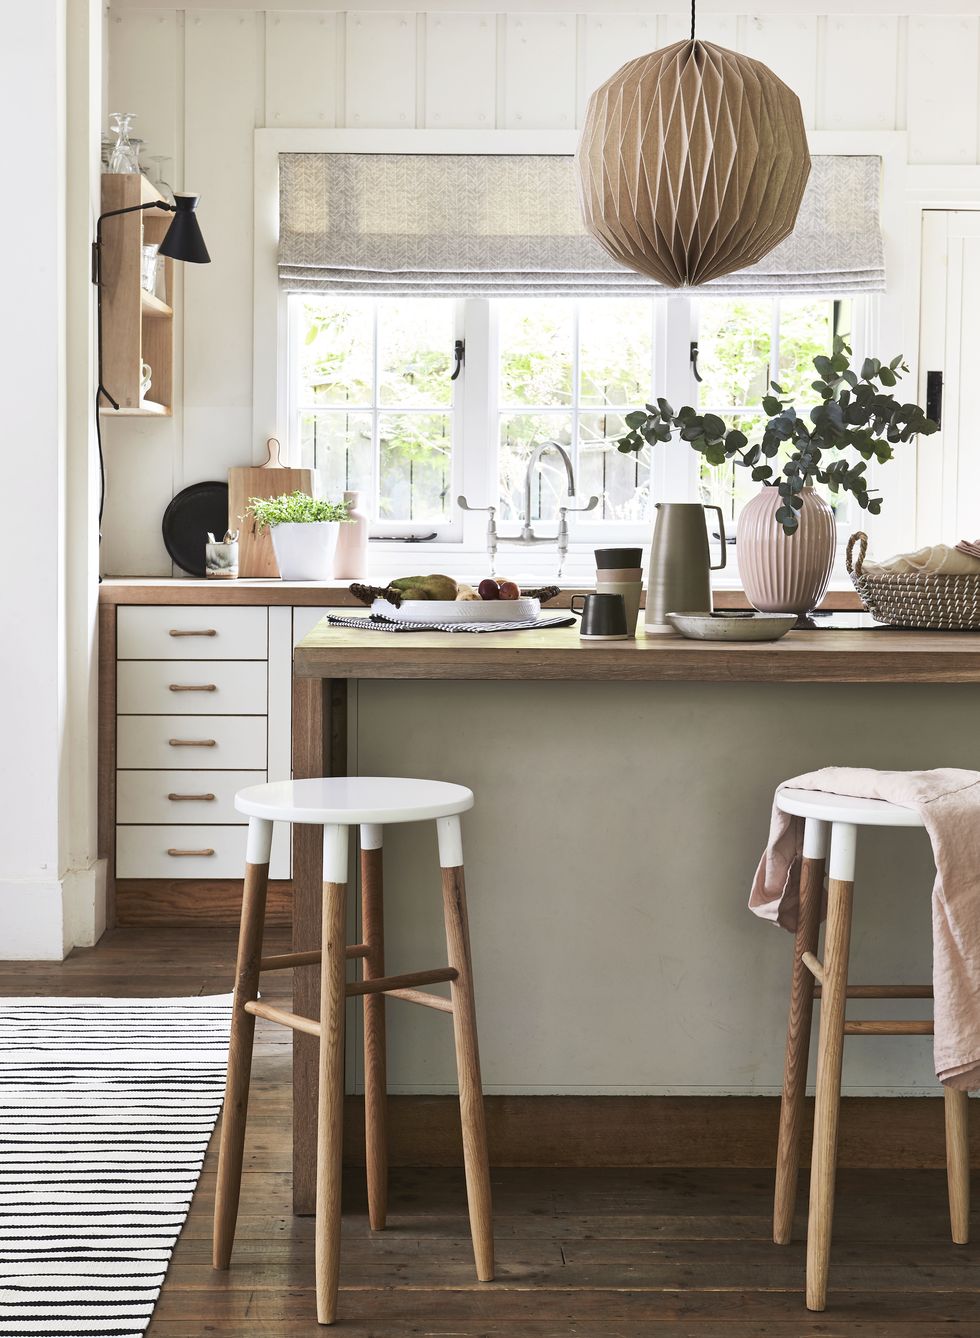 lagom, the swedish idea of having just the right amount, is captured in a perfect balance of rose tinted neutrals, wood and cosy texturesneutral and wood kitchen with kitchen counterwhite painted stool tops and drawer fronts add just enough contrast to this elegant scheme wooden pendant light